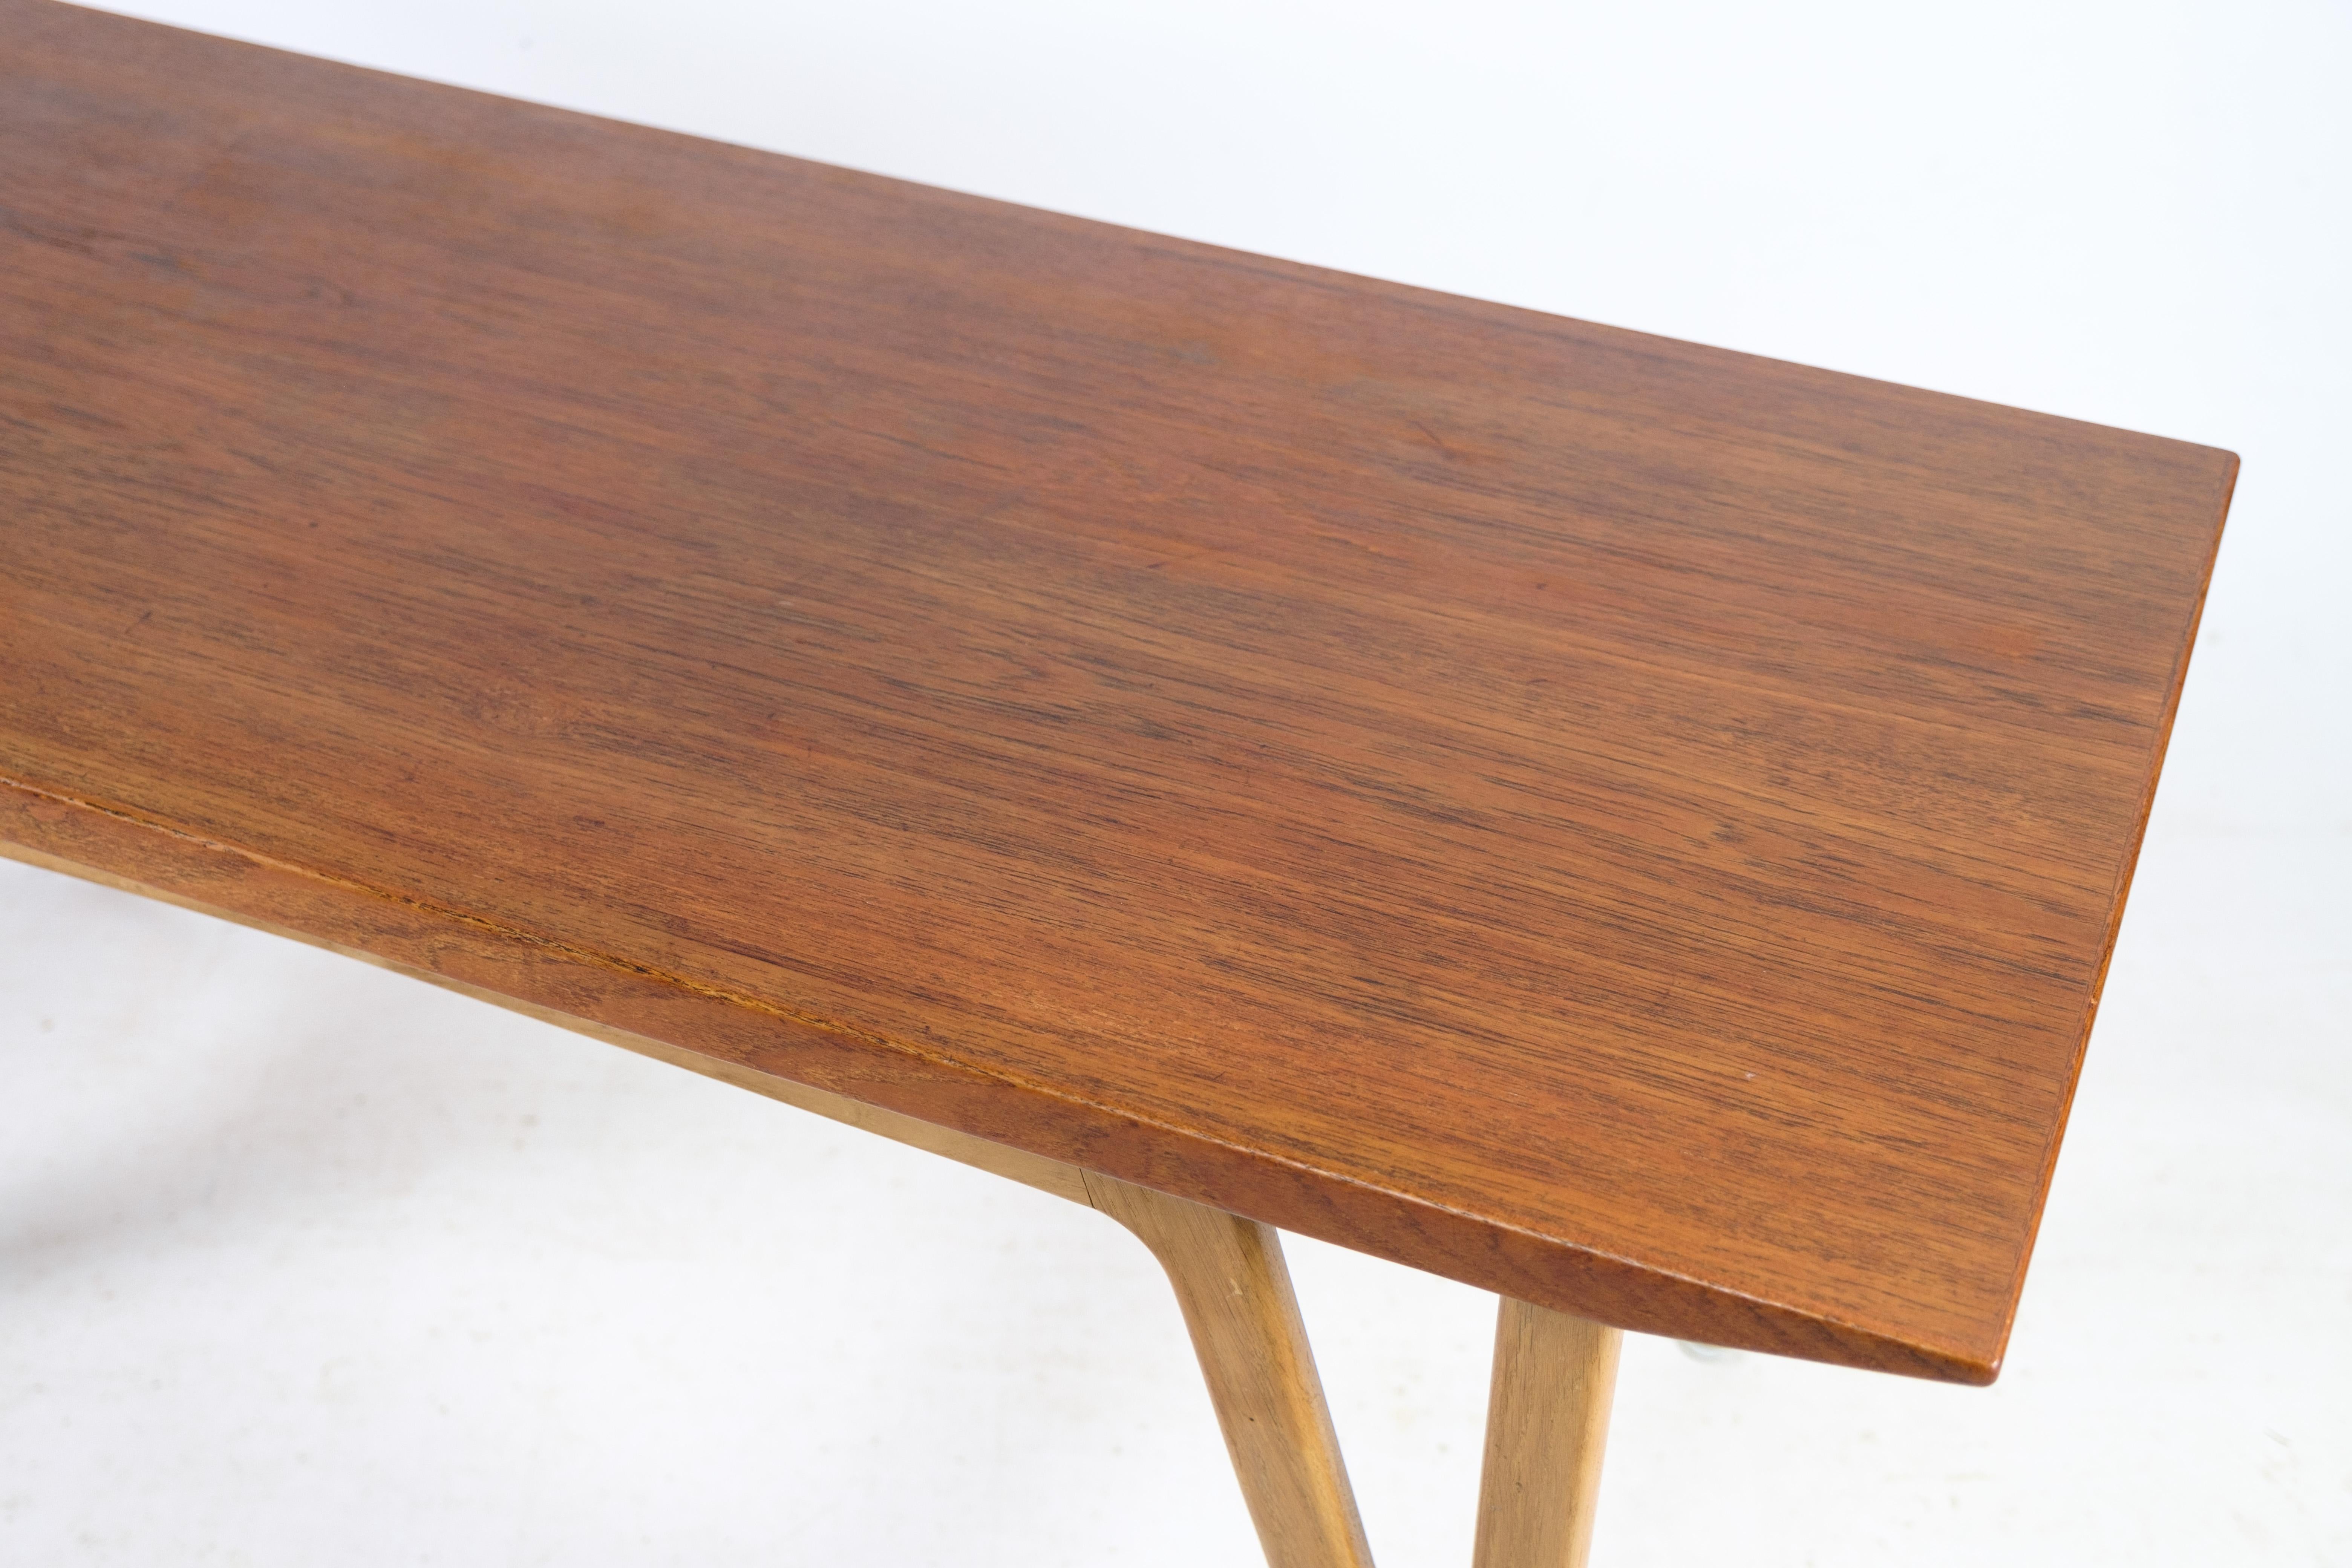 Mid-Century Modern Coffee table Made In Teak & Oak, Danish design From 1960 For Sale